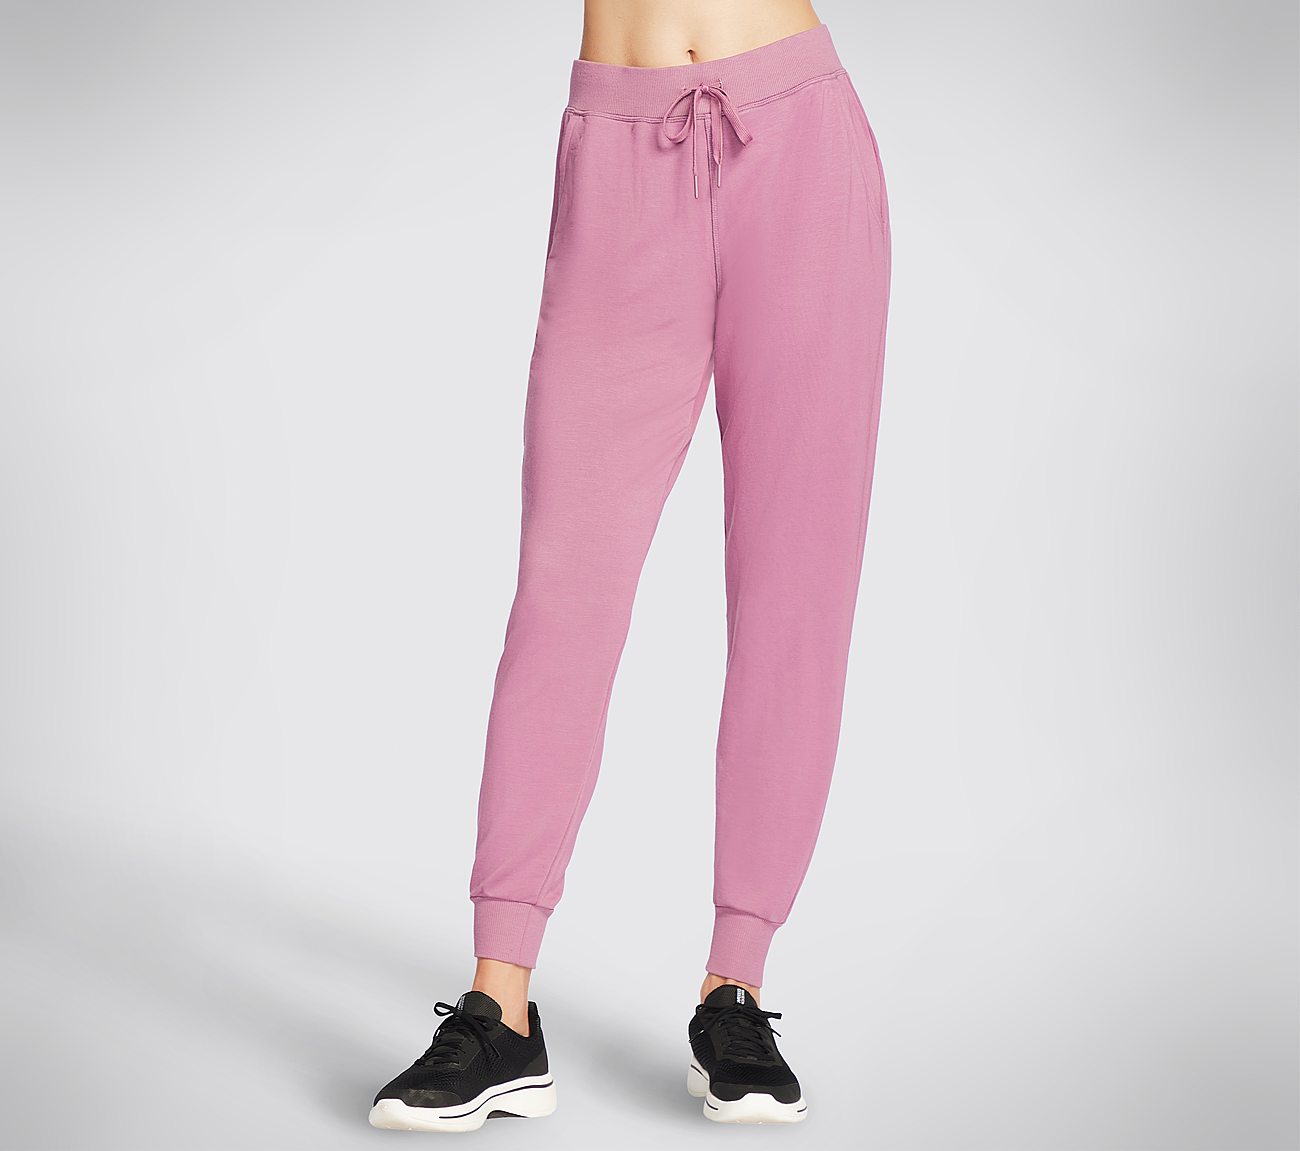 RESTFUL JOGGER, DARK MAUVE Apparel Lateral View